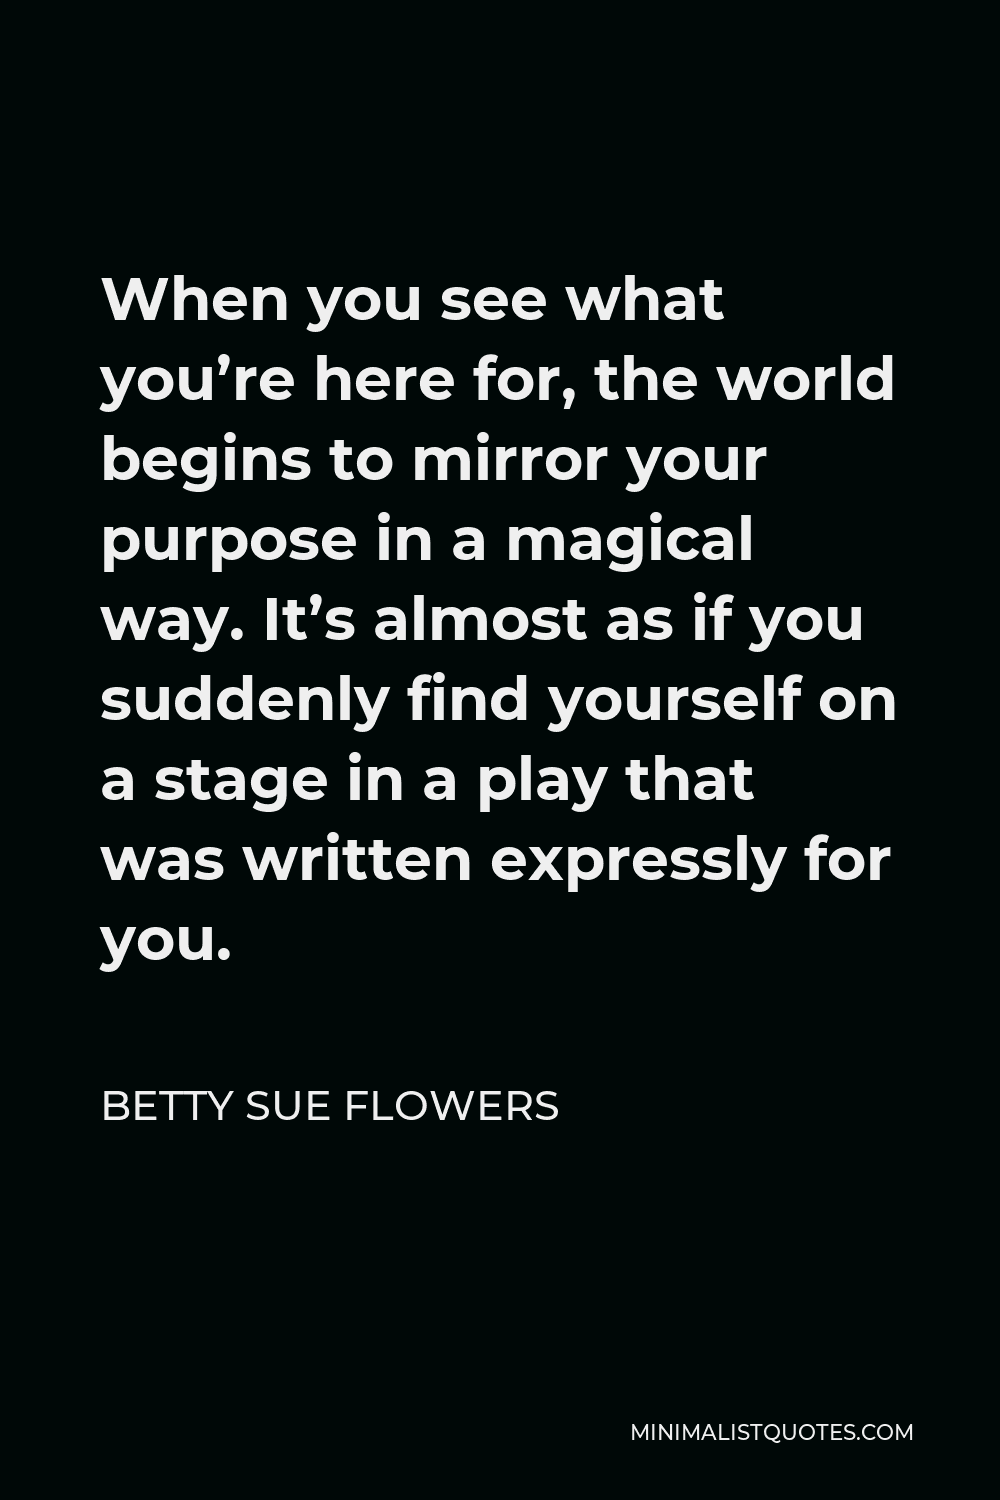 Betty Sue Flowers Quote - When you see what you’re here for, the world begins to mirror your purpose in a magical way. It’s almost as if you suddenly find yourself on a stage in a play that was written expressly for you.